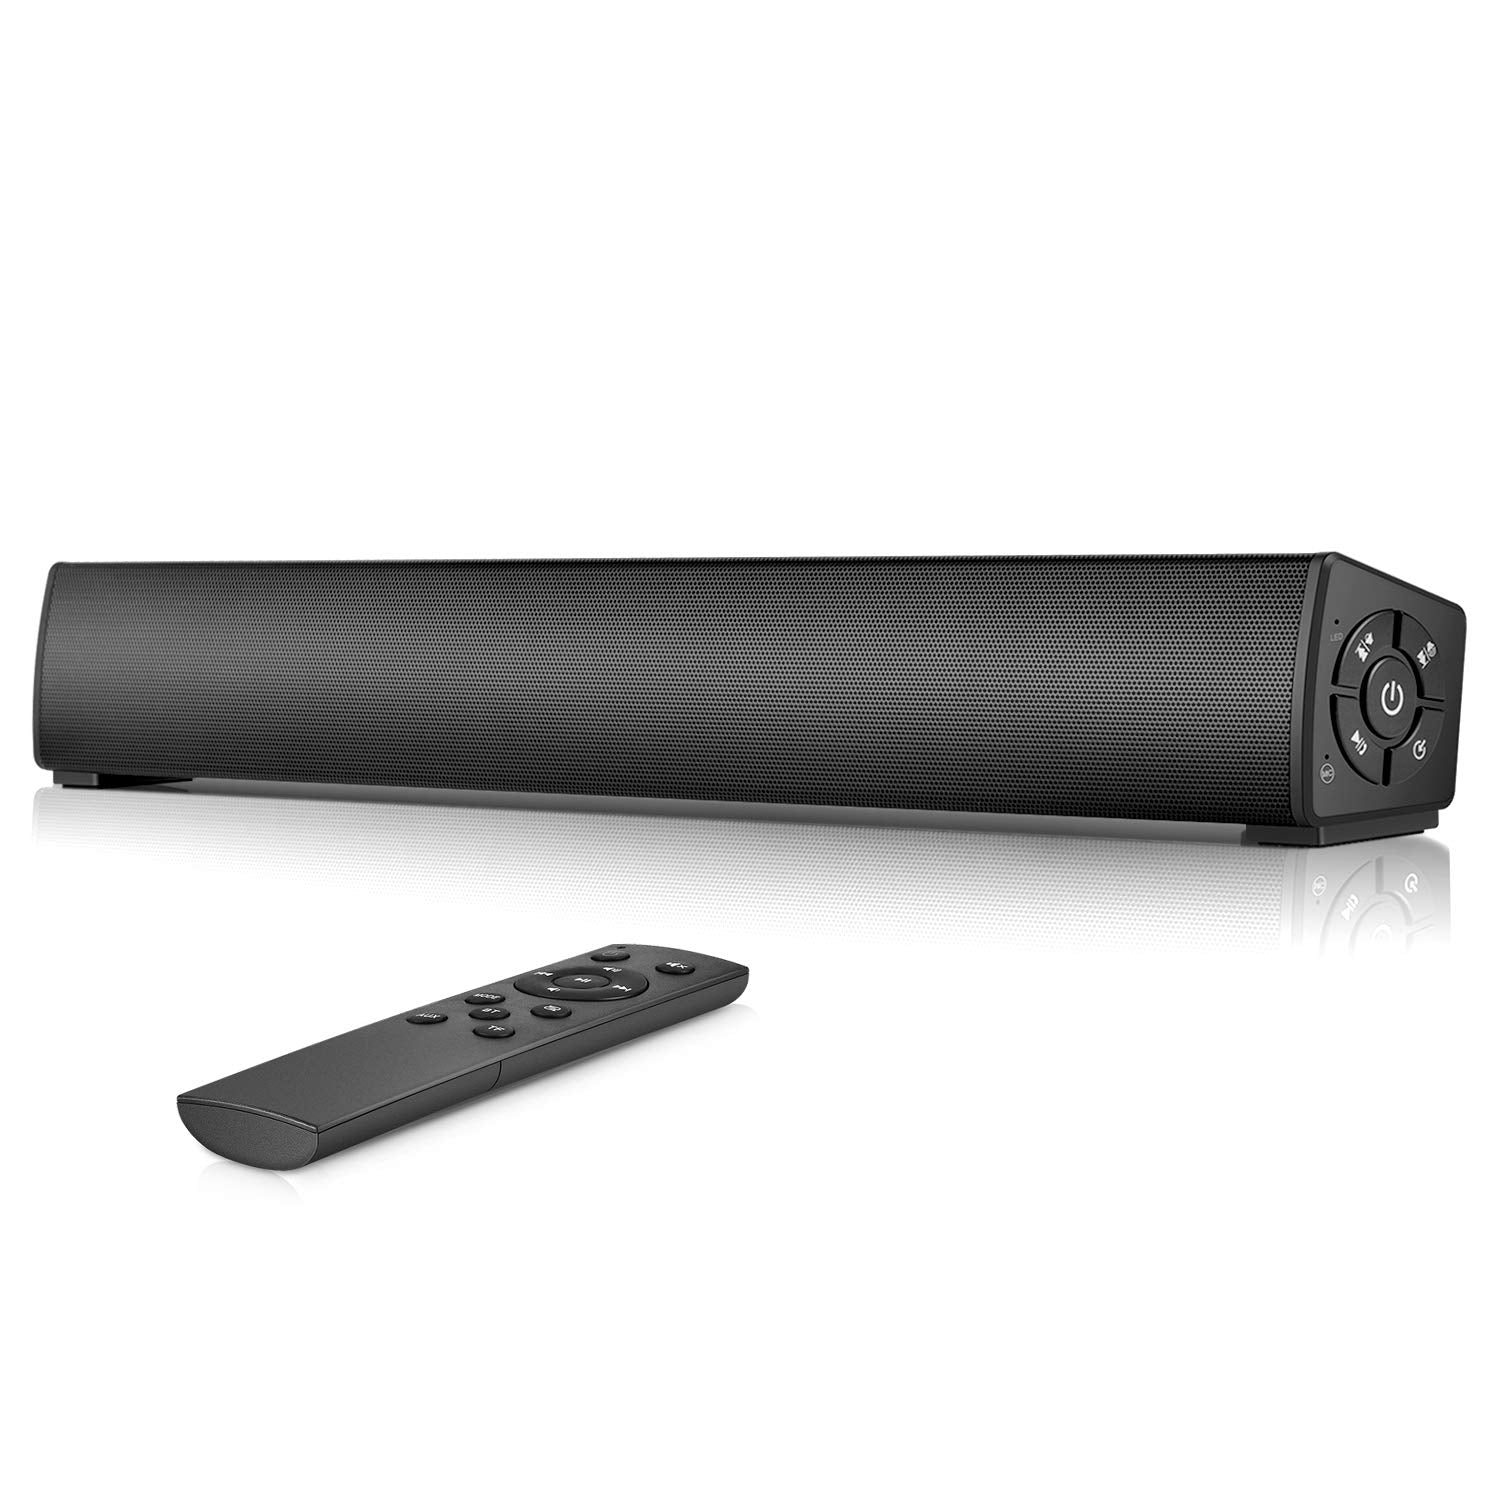 Sound bar Bluetooth Wireless, Home Theater PC Speaker Bar with Remote Control,TF Card- Surround Soundbar for PC/Phones/Tablets, 2 X 10W Compact Sound Bar 2.0 Channel - Home Decor Gifts and More